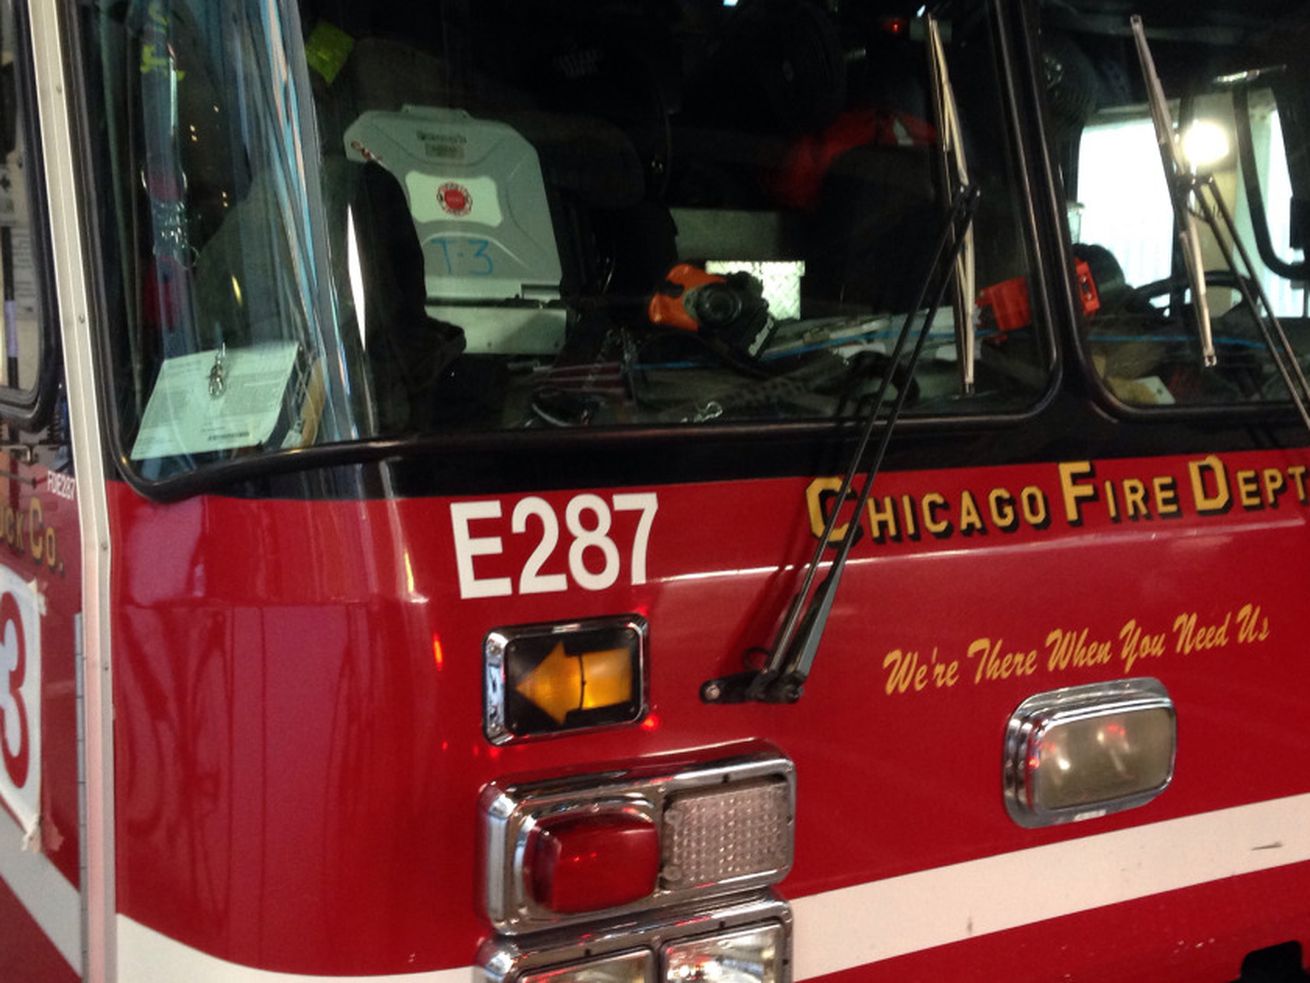 Thirteen people were displaced after a fire in Back of the Yards.